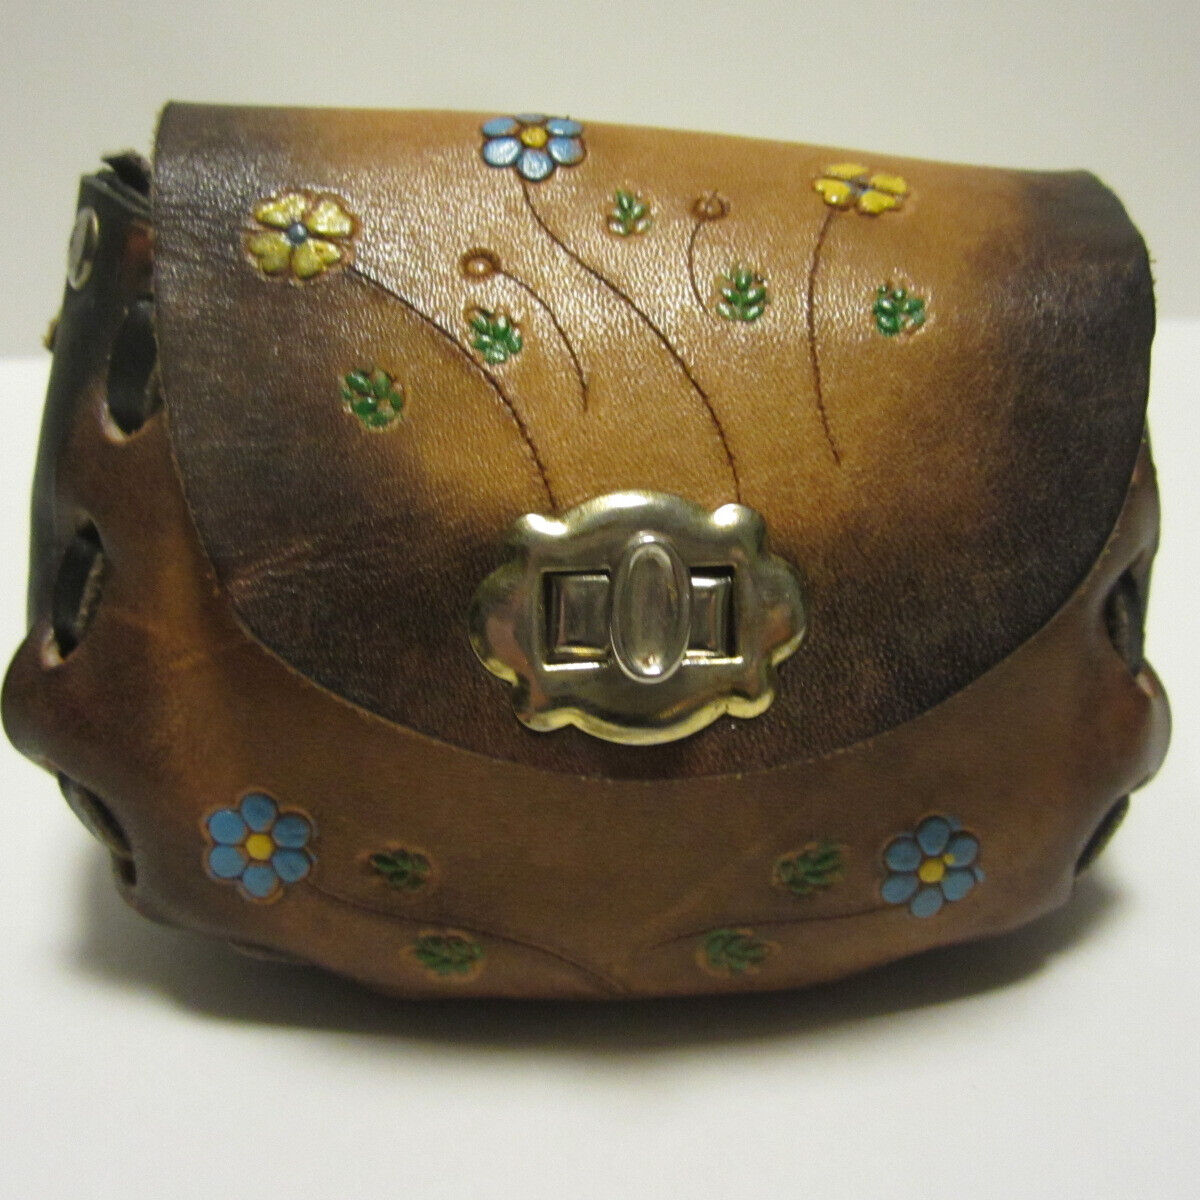 Vintage 70's Tooled Leather mini Saddle Bag Boho Hippy Handcrafted pouch Mexico